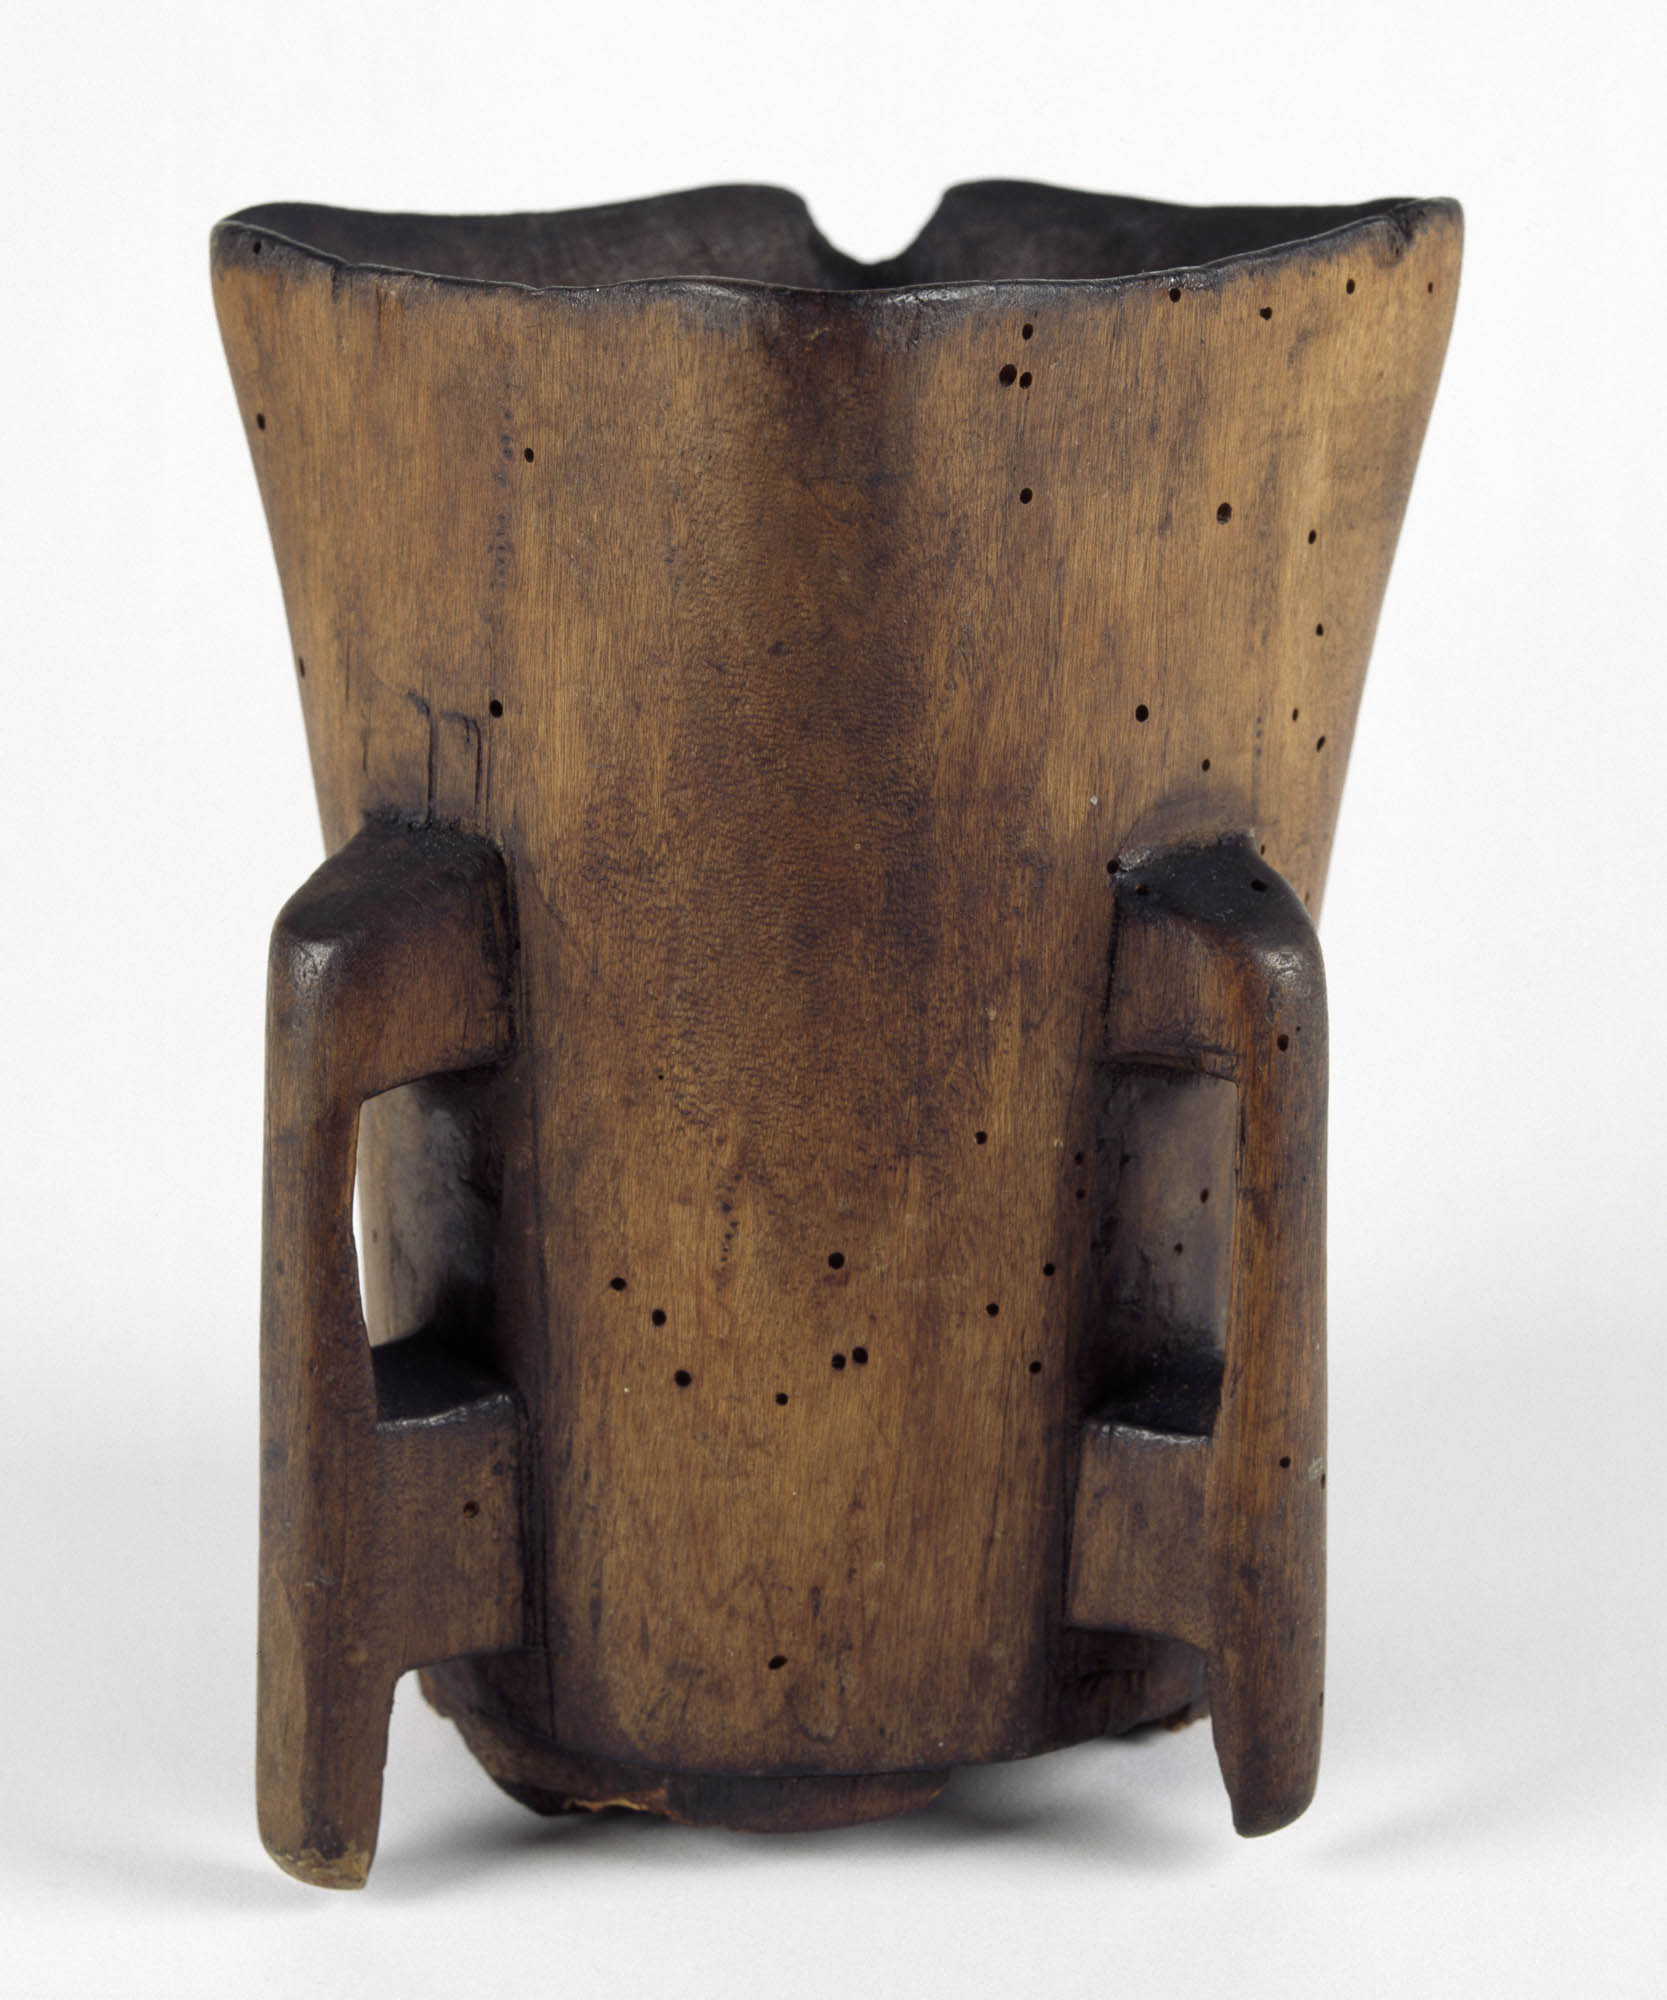 Square rustic-looking wooden cup with two handles that touch the ground.